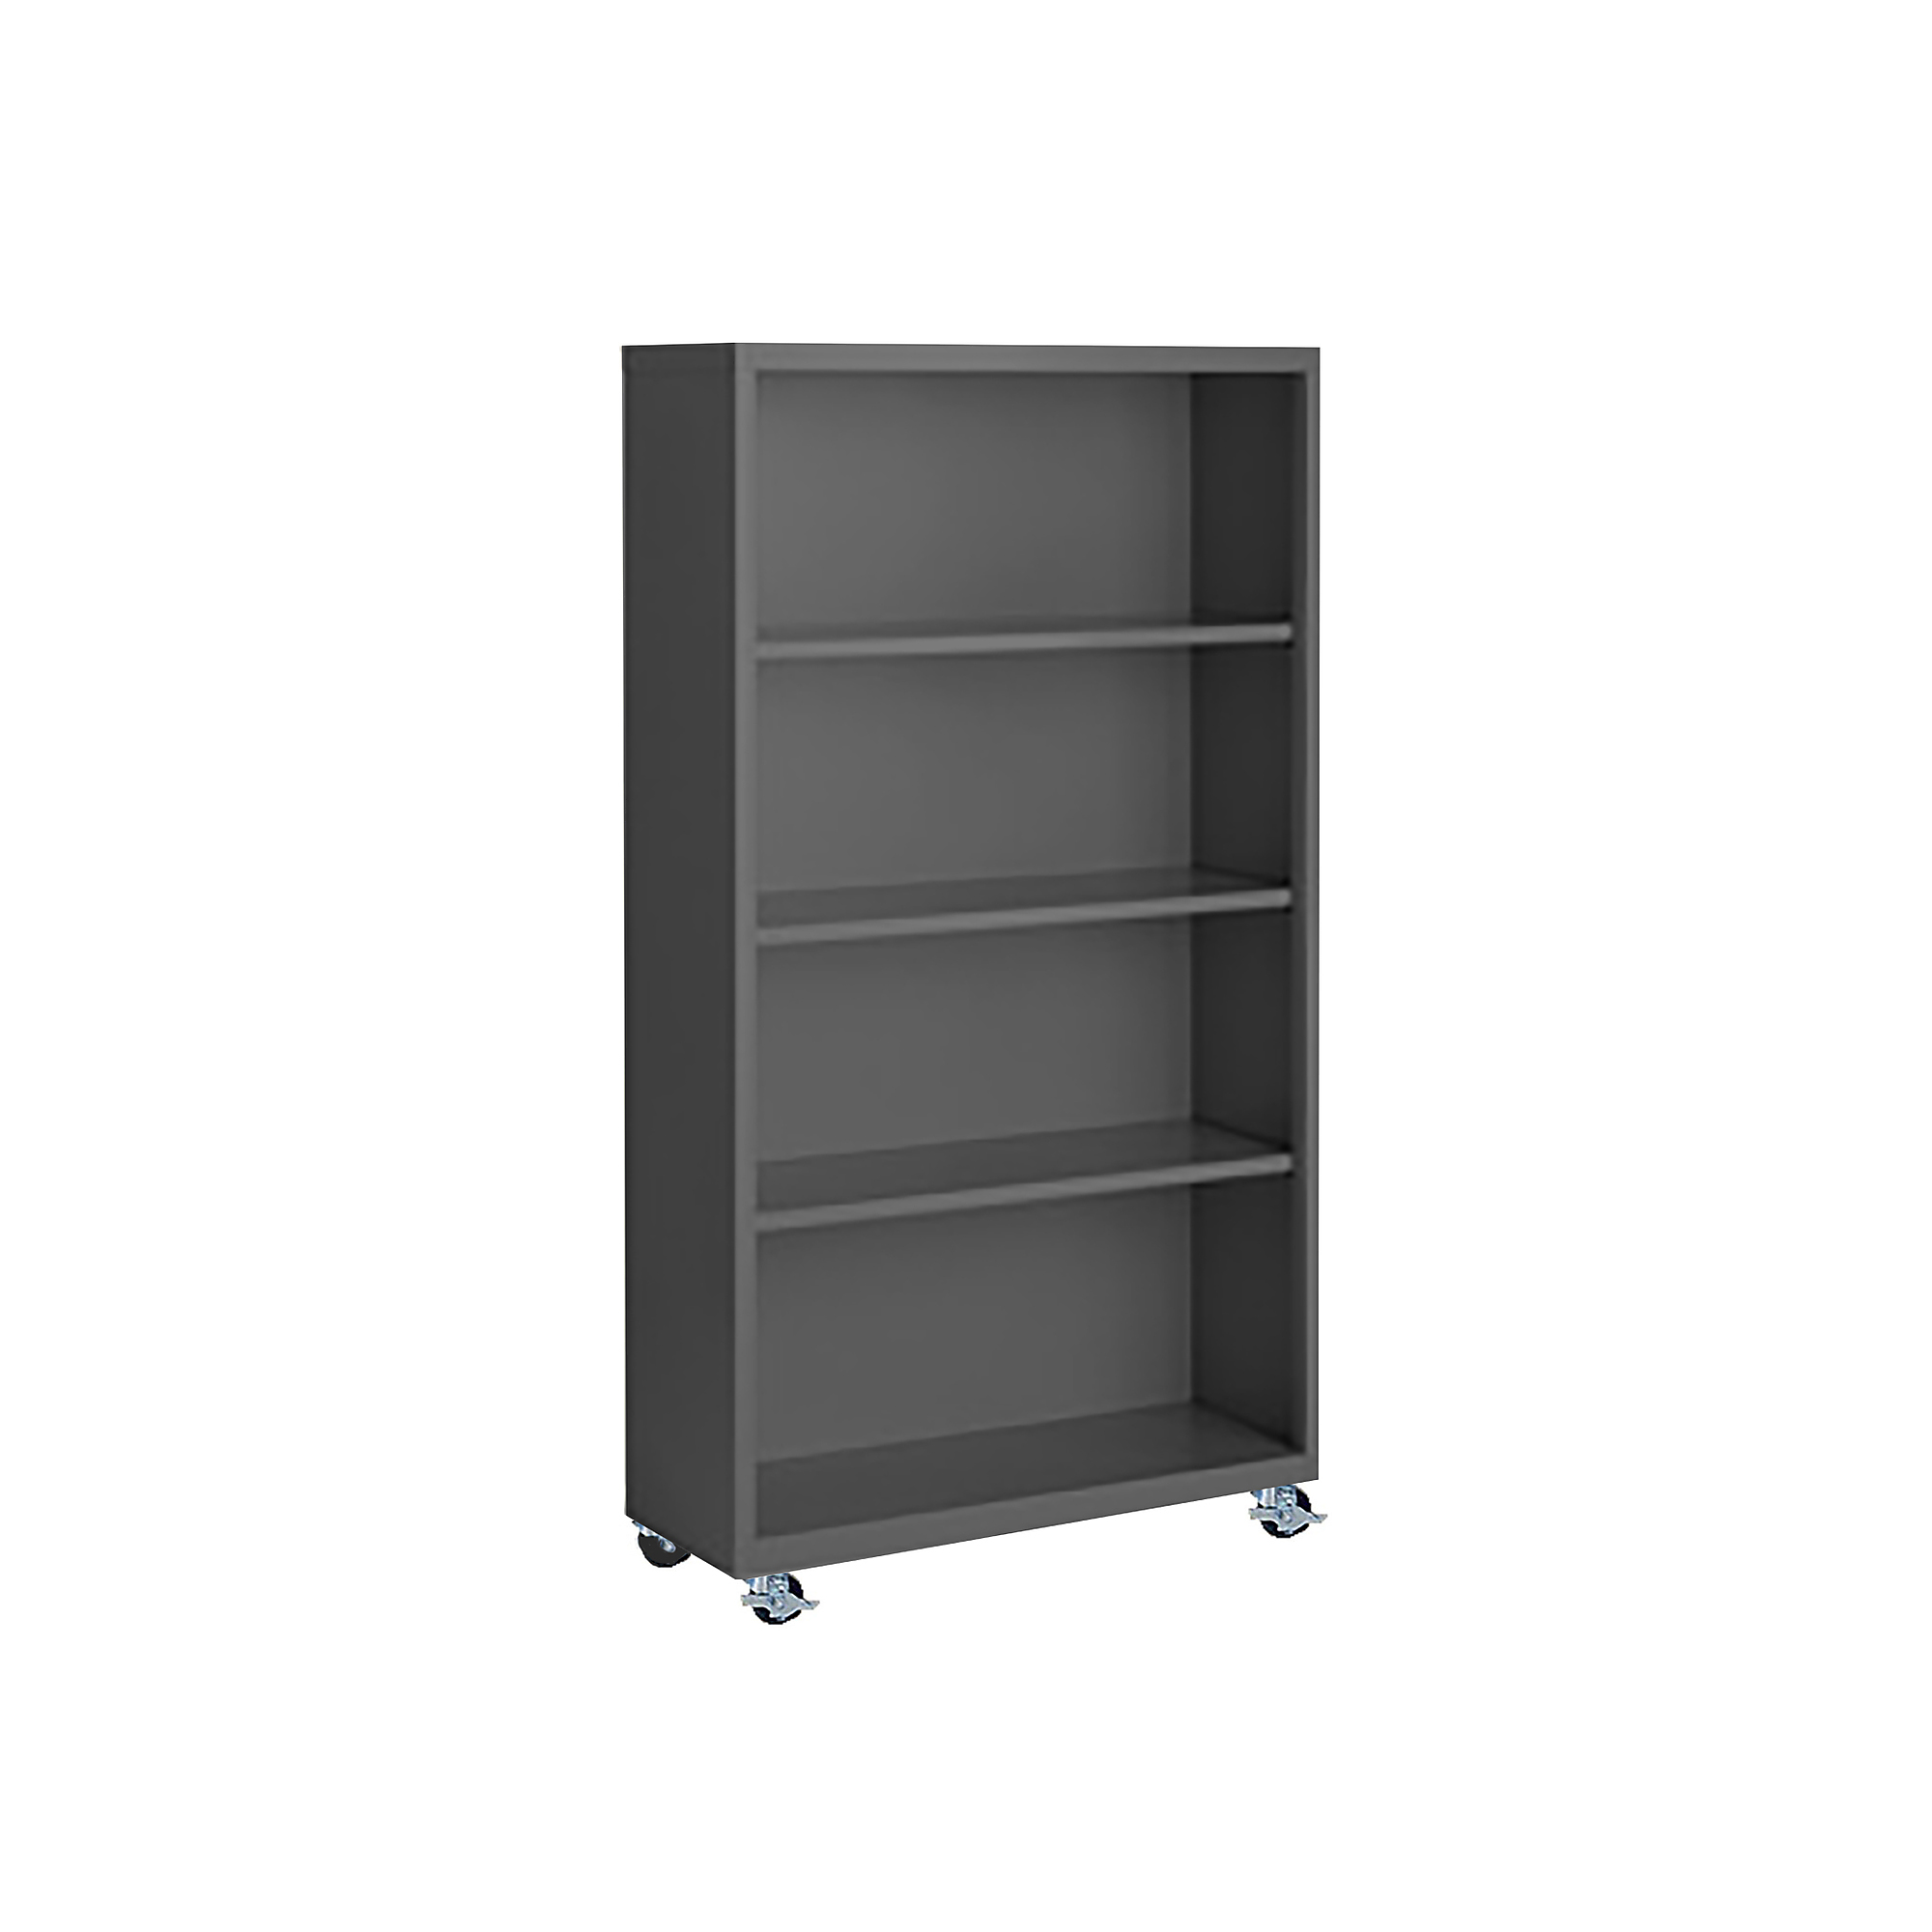 Steel Cabinets USA, 36Inchx18Inchx55Inch Charcoal Mobile Bookcase Assembled, Height 55 in, Shelves (qty.) 4, Material Steel, Model MBCA-365518-C